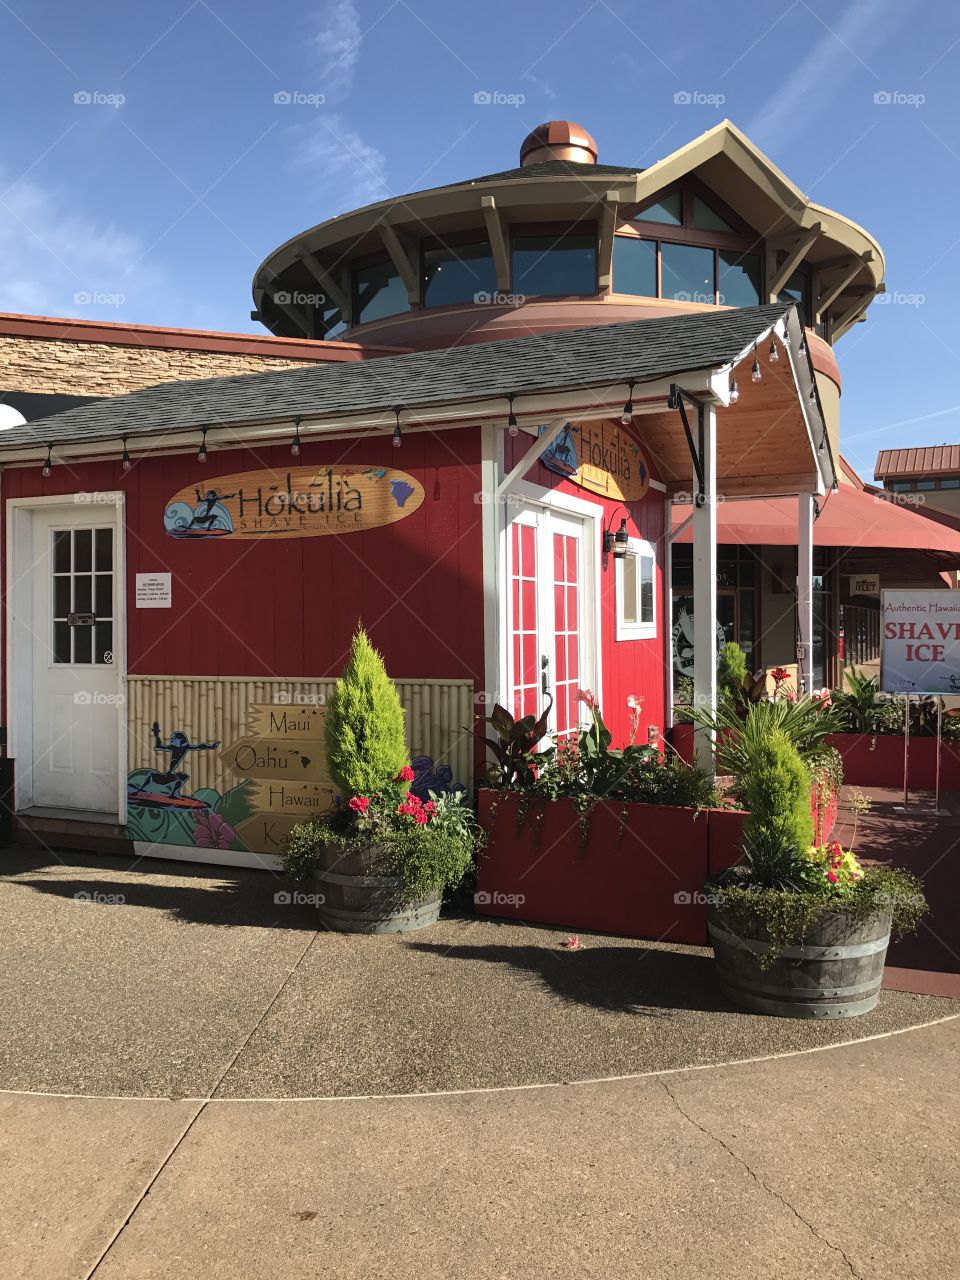 Small red Hawaiian shaved ice shack on a sunny day with blue sky in the background